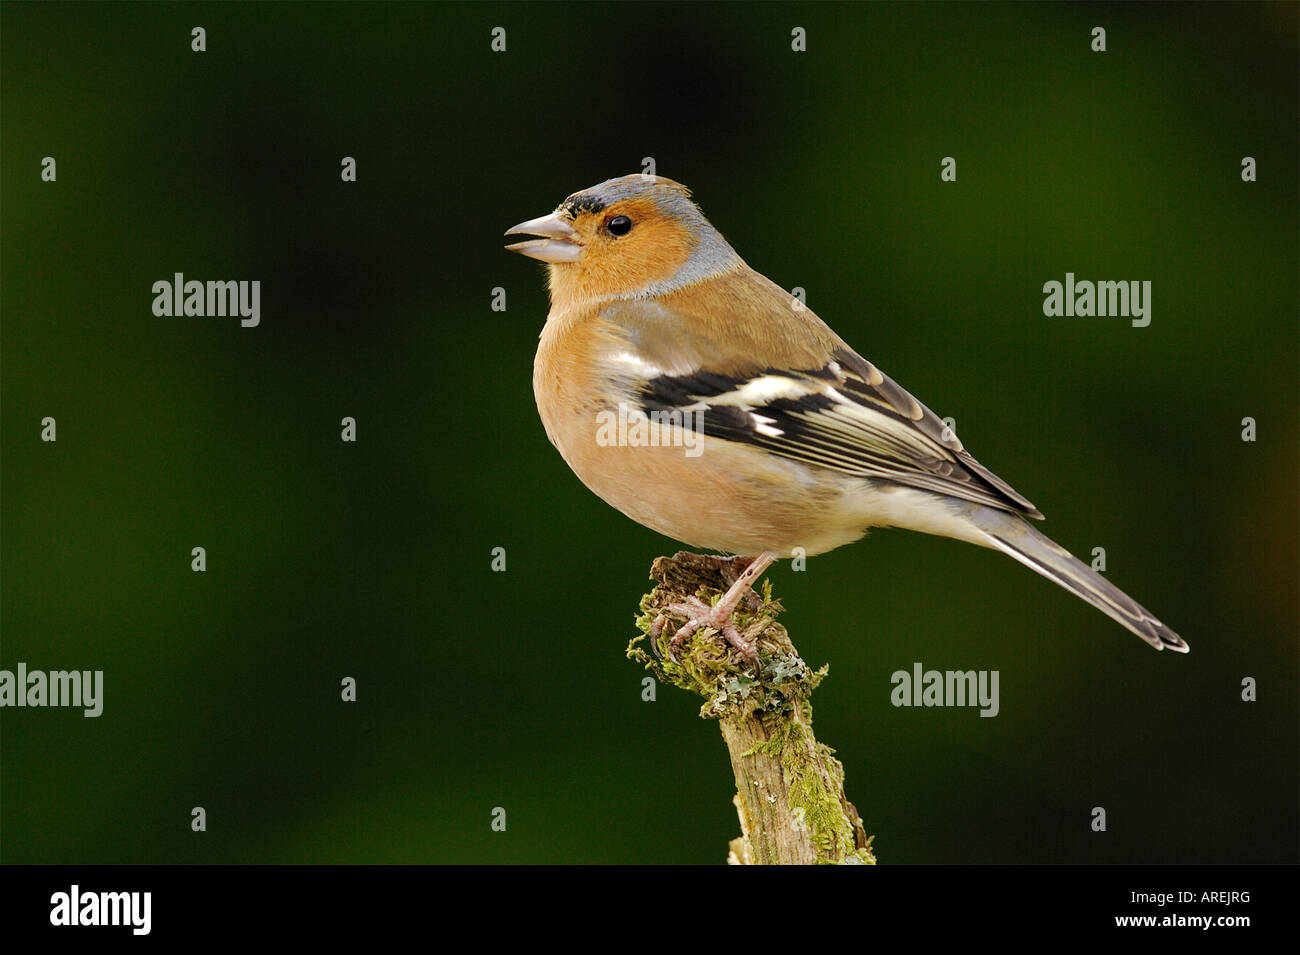 Chaffinch on a branch Stock Photo